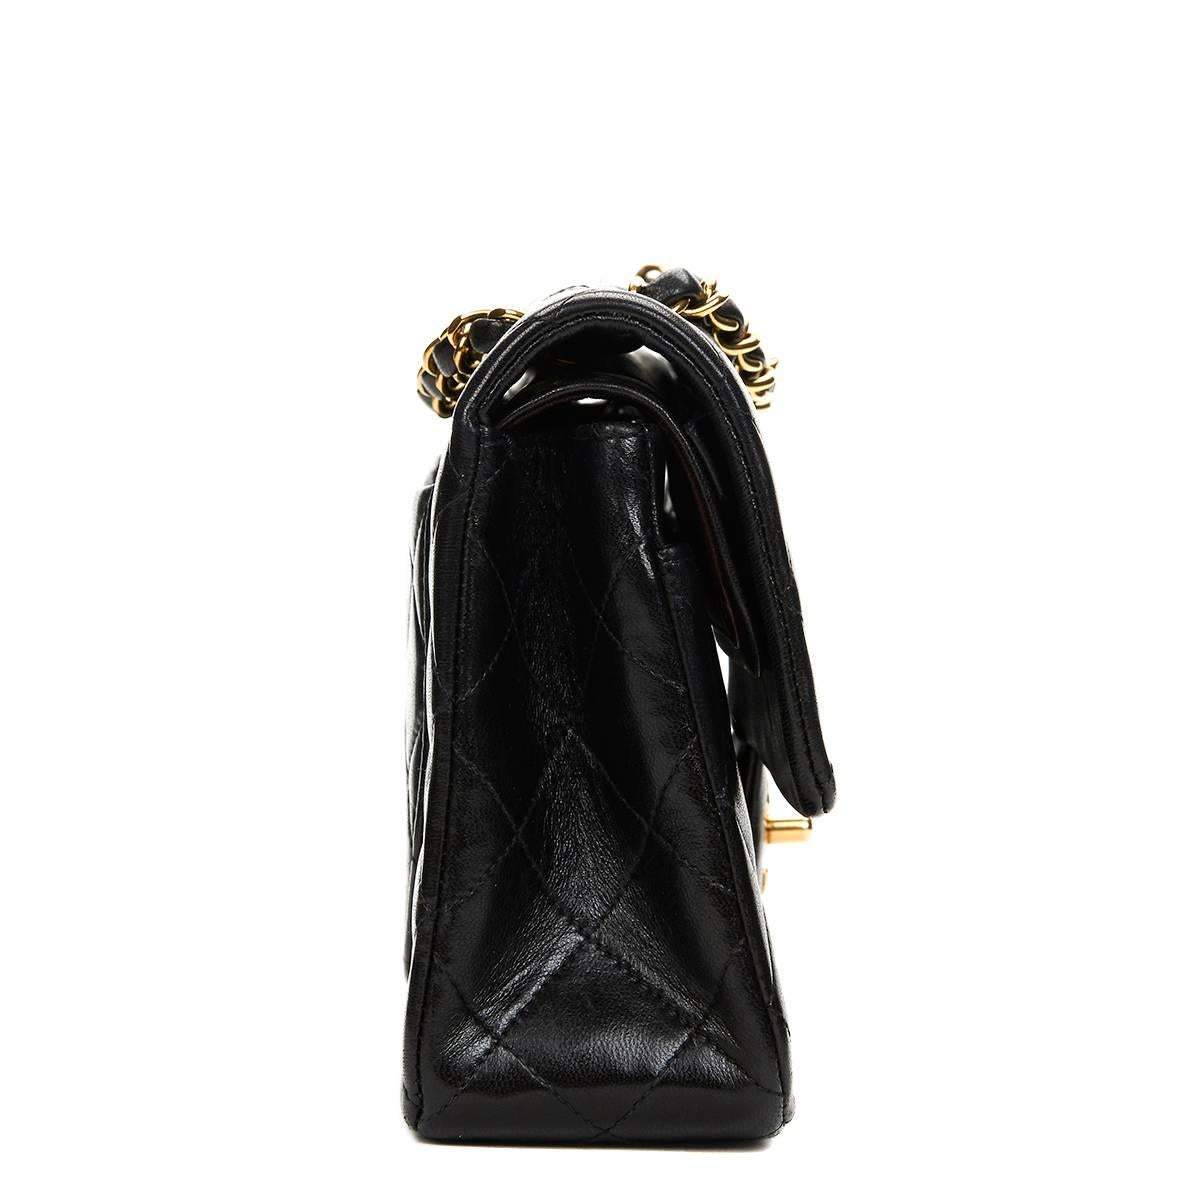 CHANEL
Black Quilted Lambskin Vintage Small Classic Double Flap Bag

This CHANEL Small Classic Double Flap Bag is in Excellent Pre-Owned Condition. Circa 1994. Primarily made from Lambskin Leather complimented by Gold hardware. Our  reference is